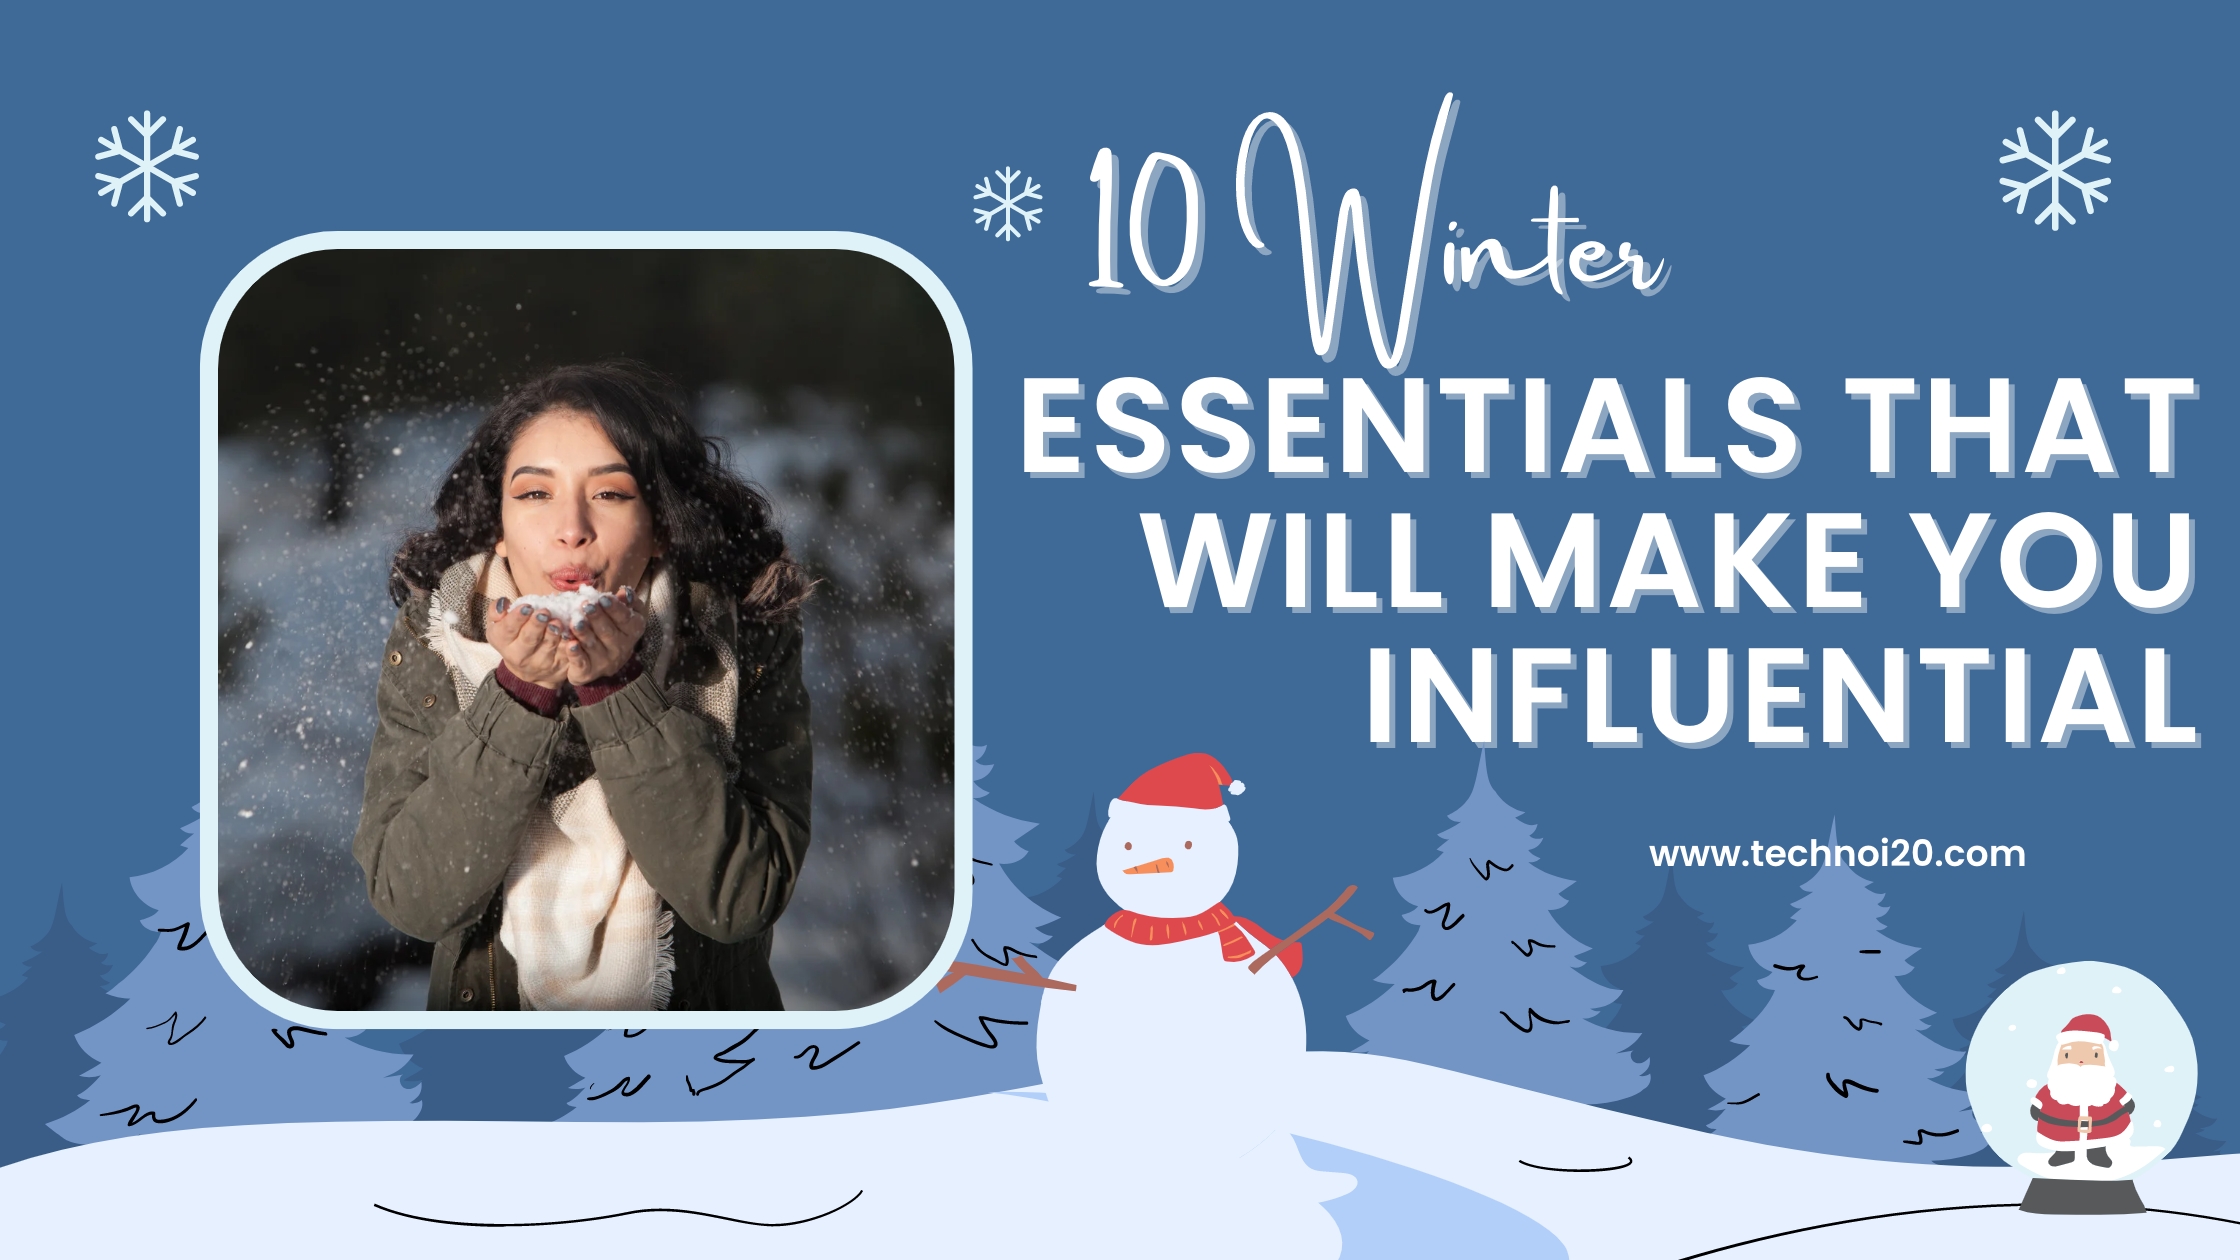 10 Winter Essentials That Will Make You Influential